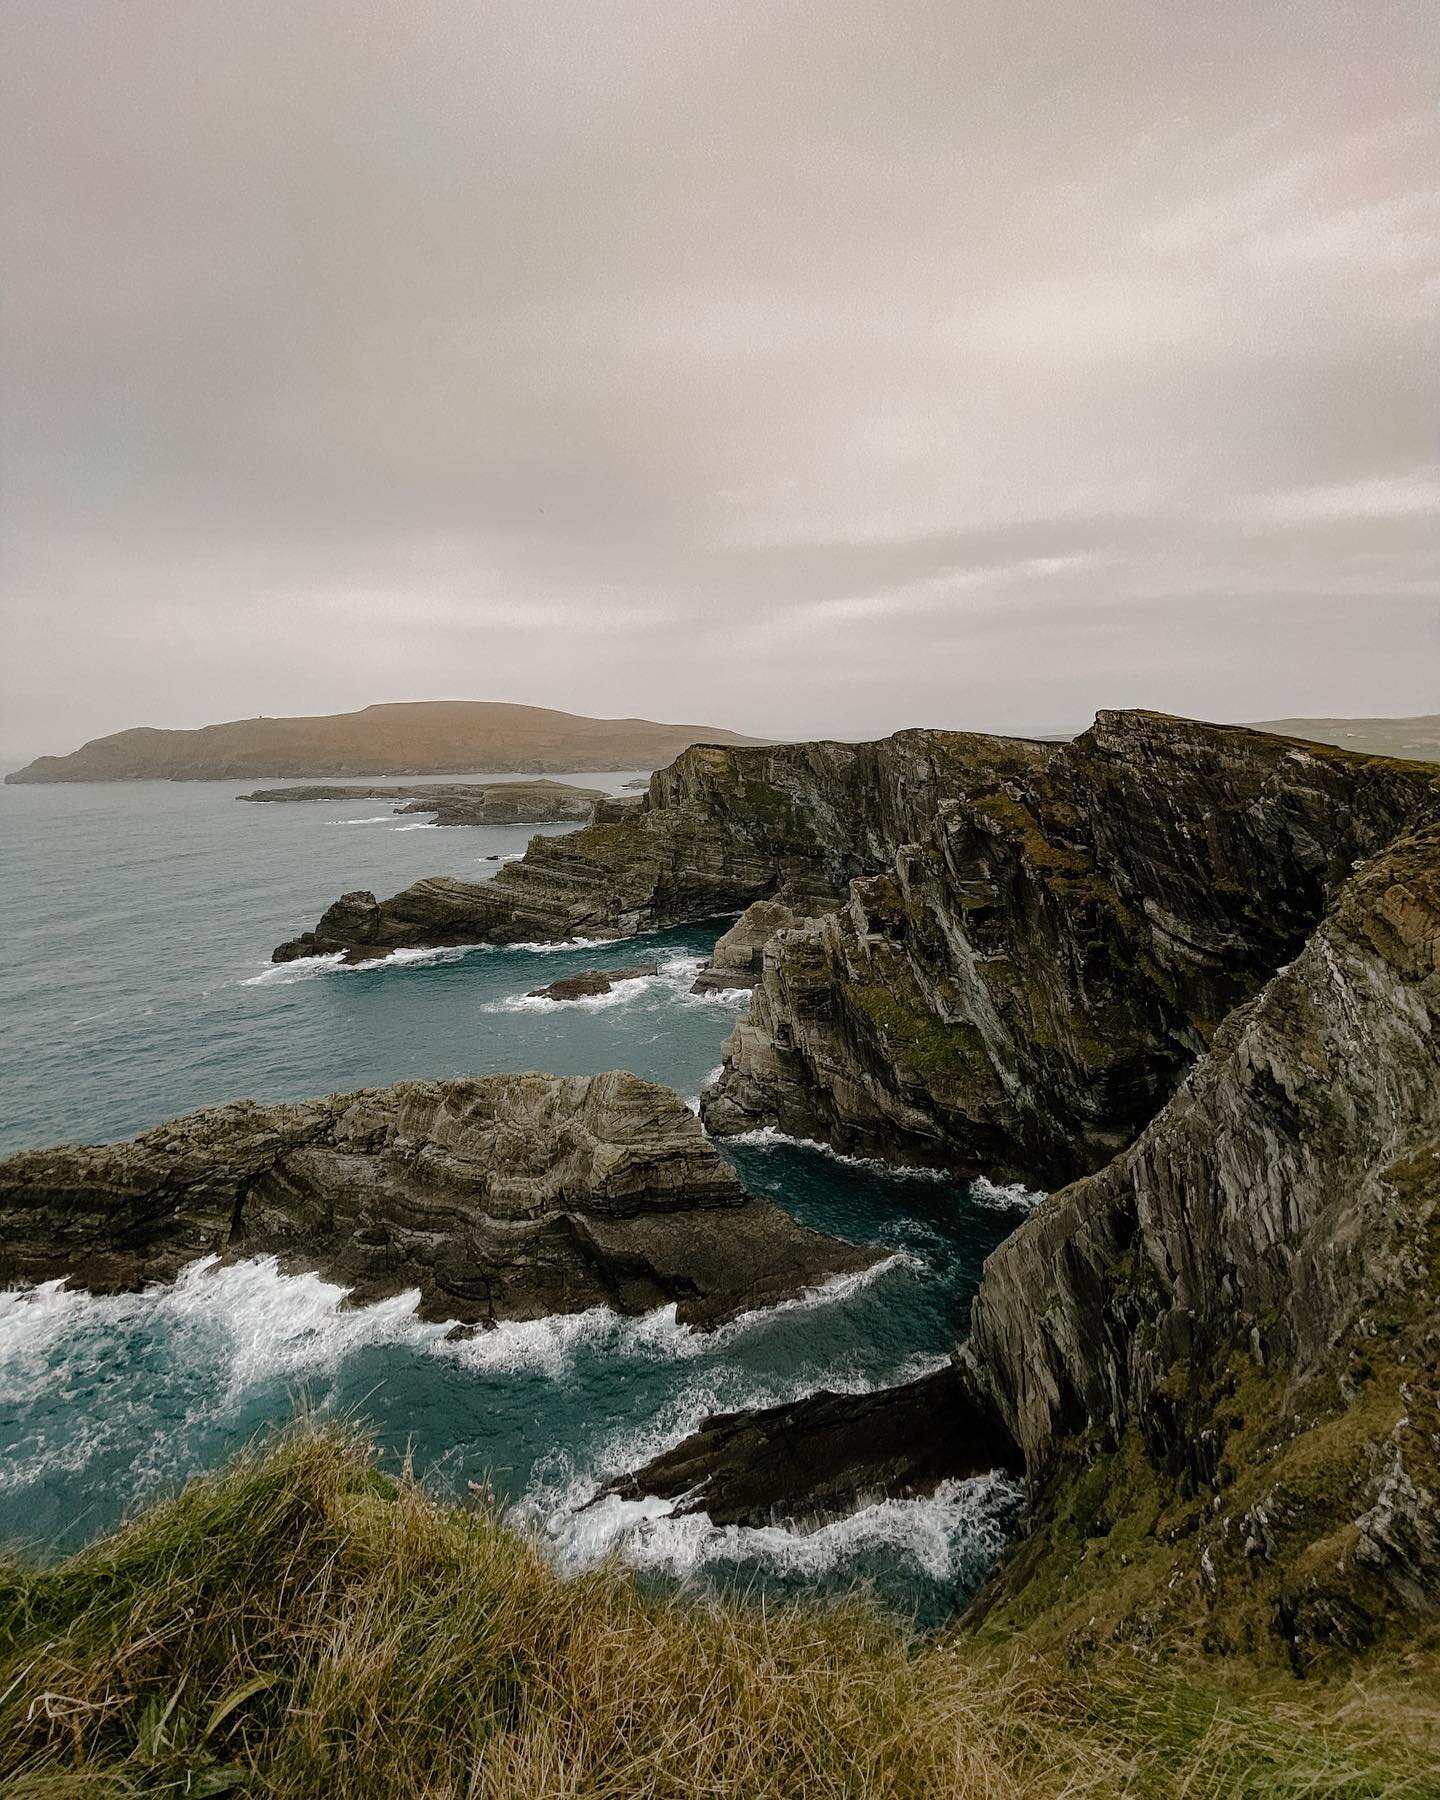 The Ring of Kerry should be on the bucket list for places to stop in Ireland - the 111 mile route packs so much to see in a day&rsquo;s drive 🇮🇪 

#ireland #discoverireland #instaireland #ireland_gram #irelandtravel #visitireland #ringofkerry #kerr